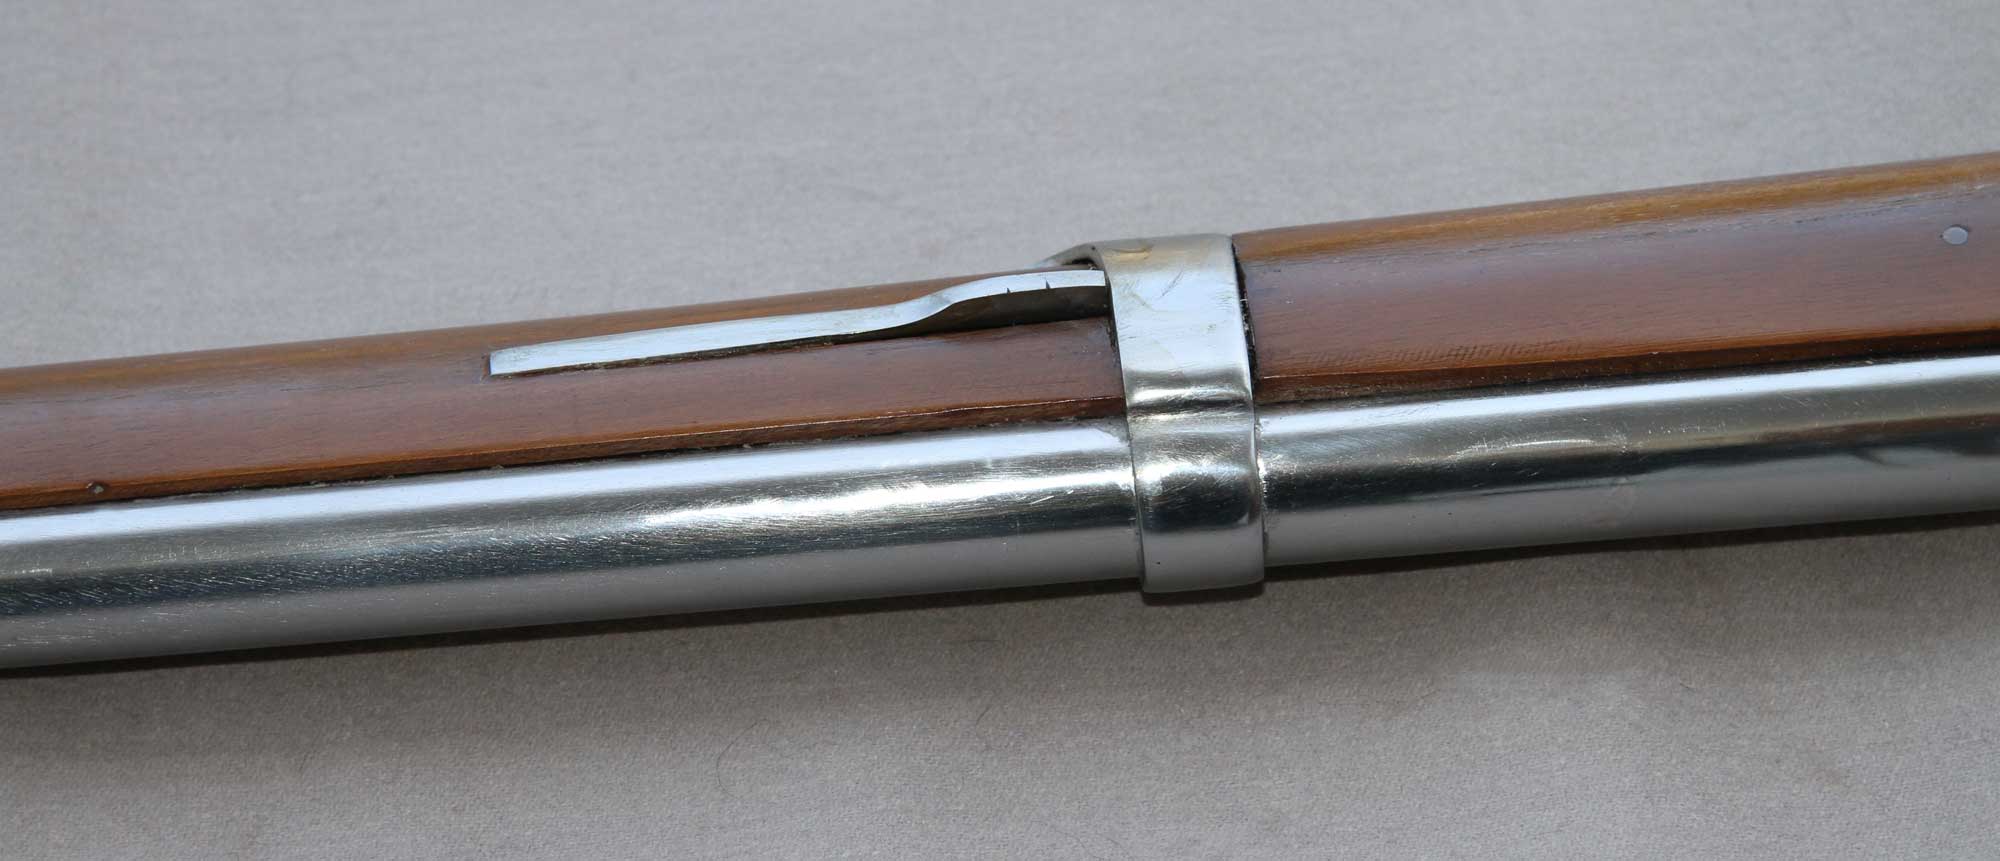 French, 1777 Charleville (AN IX) musket